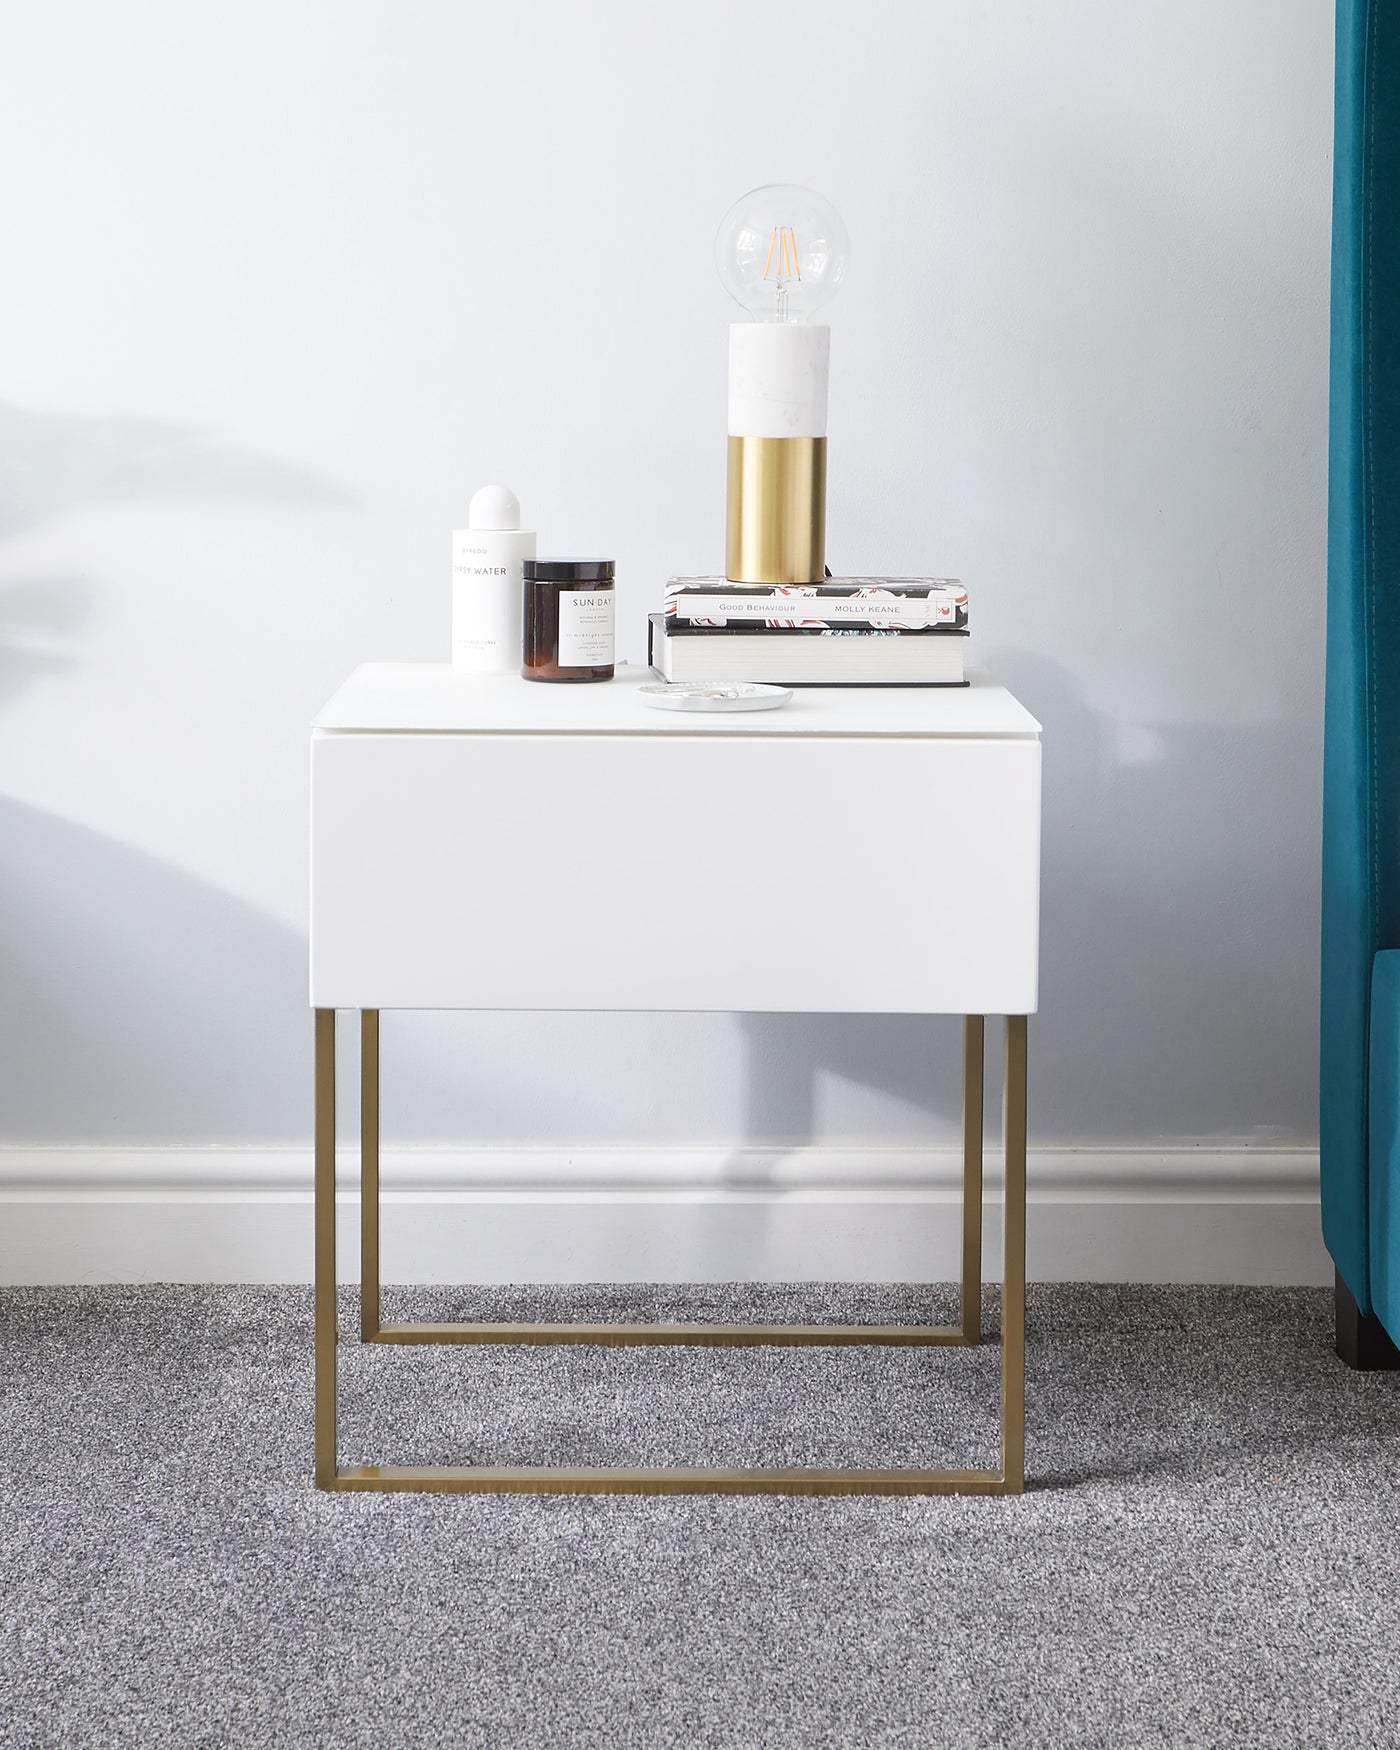 Modern white rectangular side table with a sleek finish and golden metal legs in a minimalist style.